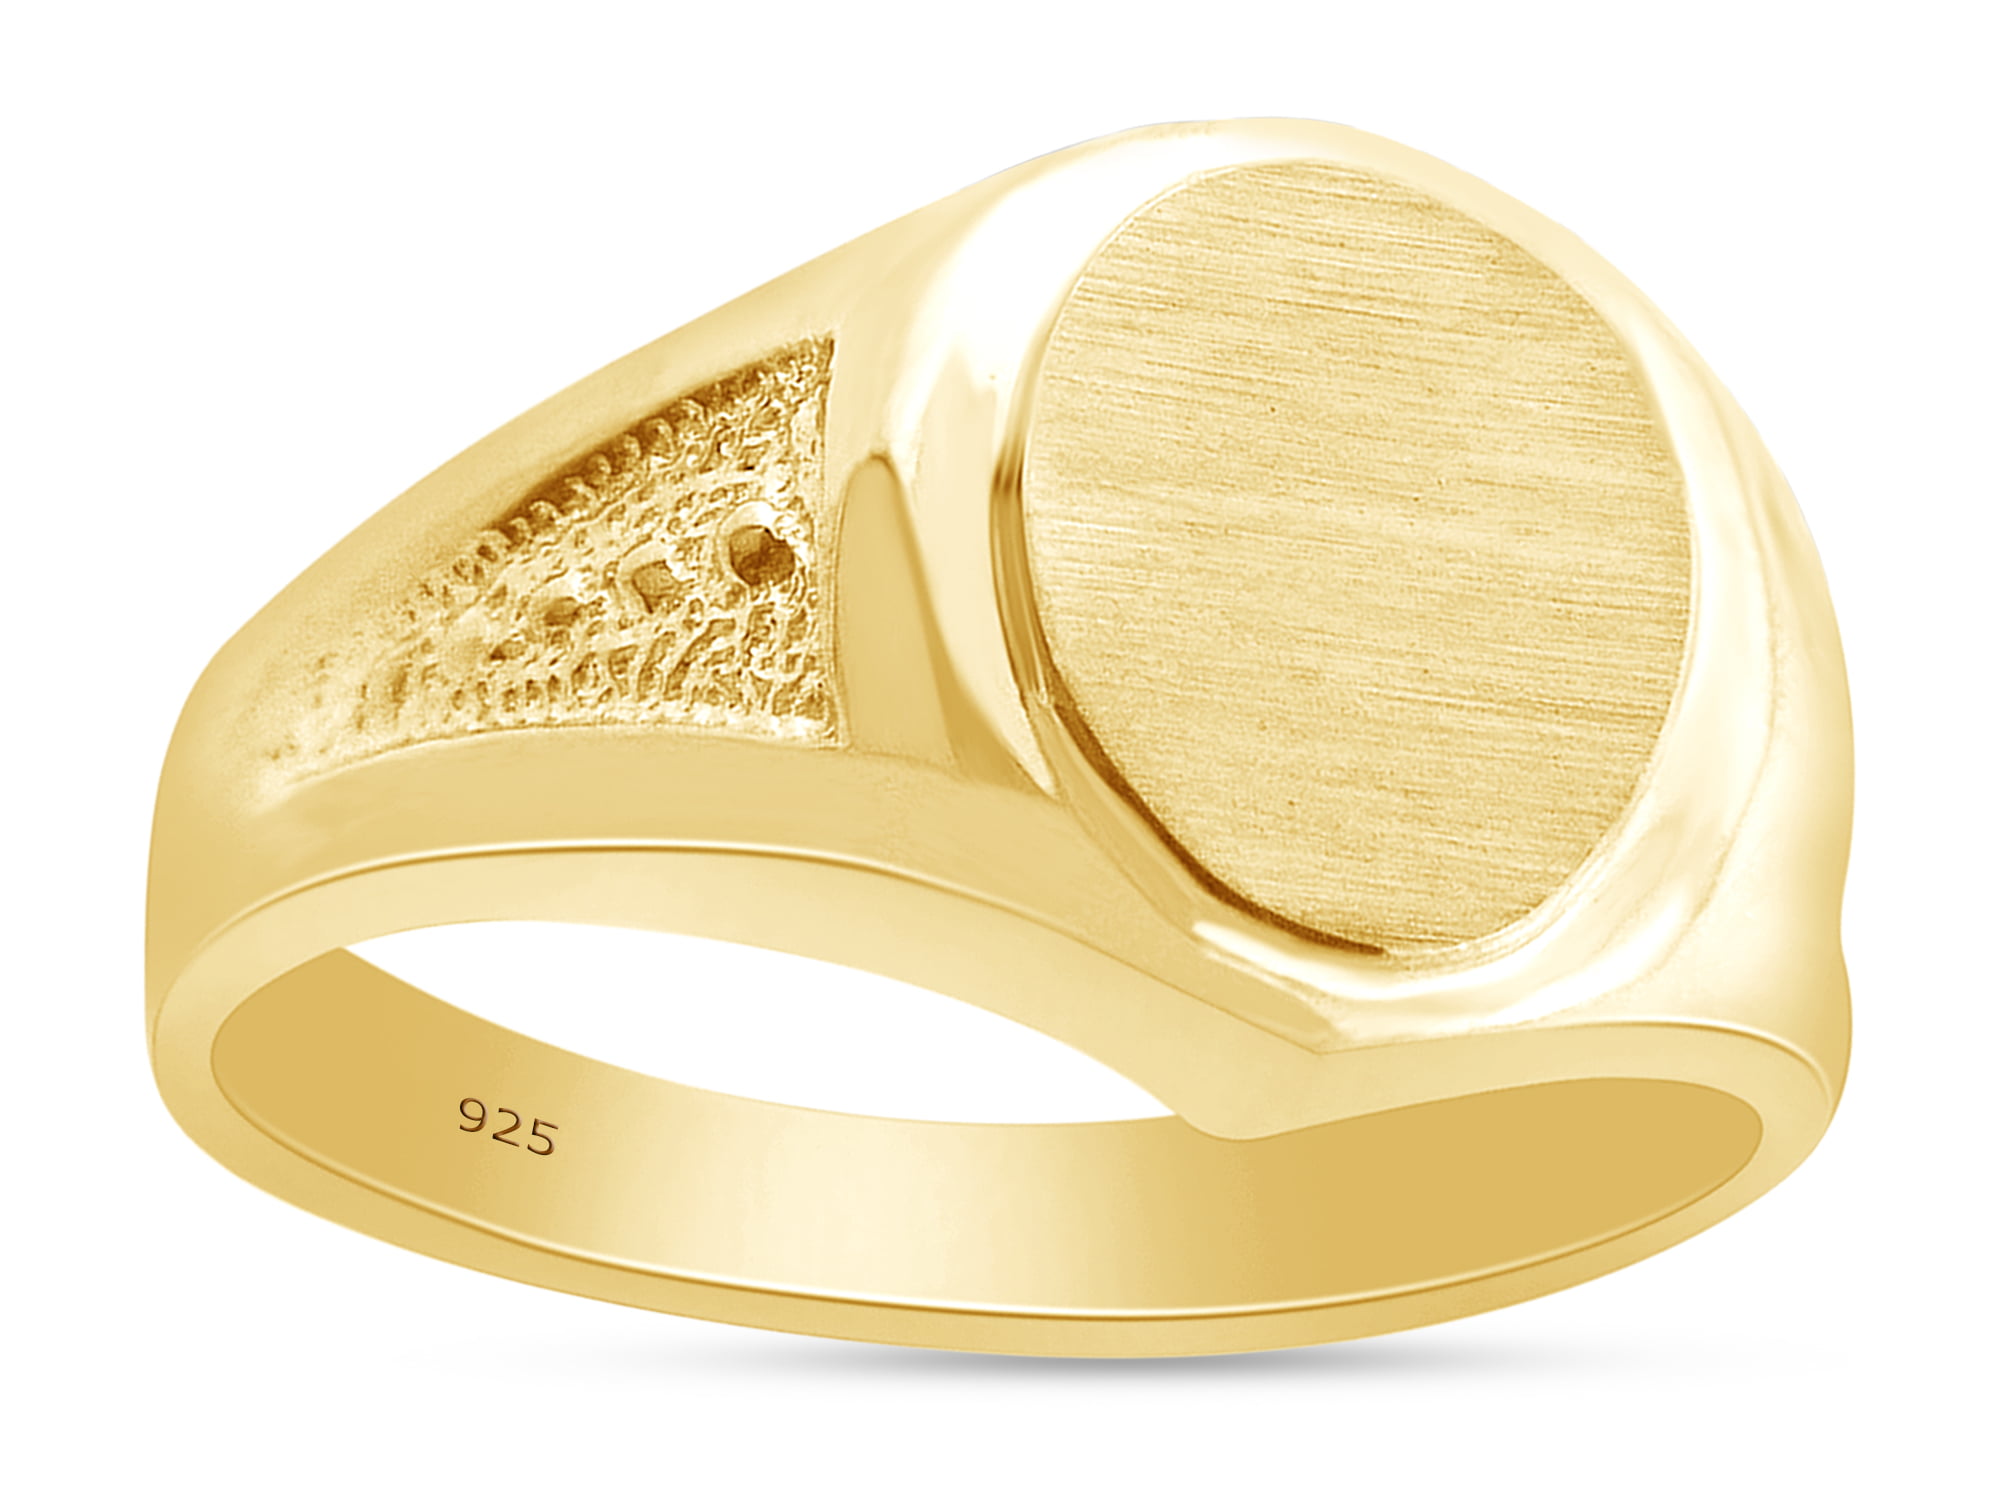 Buy 4 Gram Gold Ring For Men at Best Prices Online at Tata CLiQ